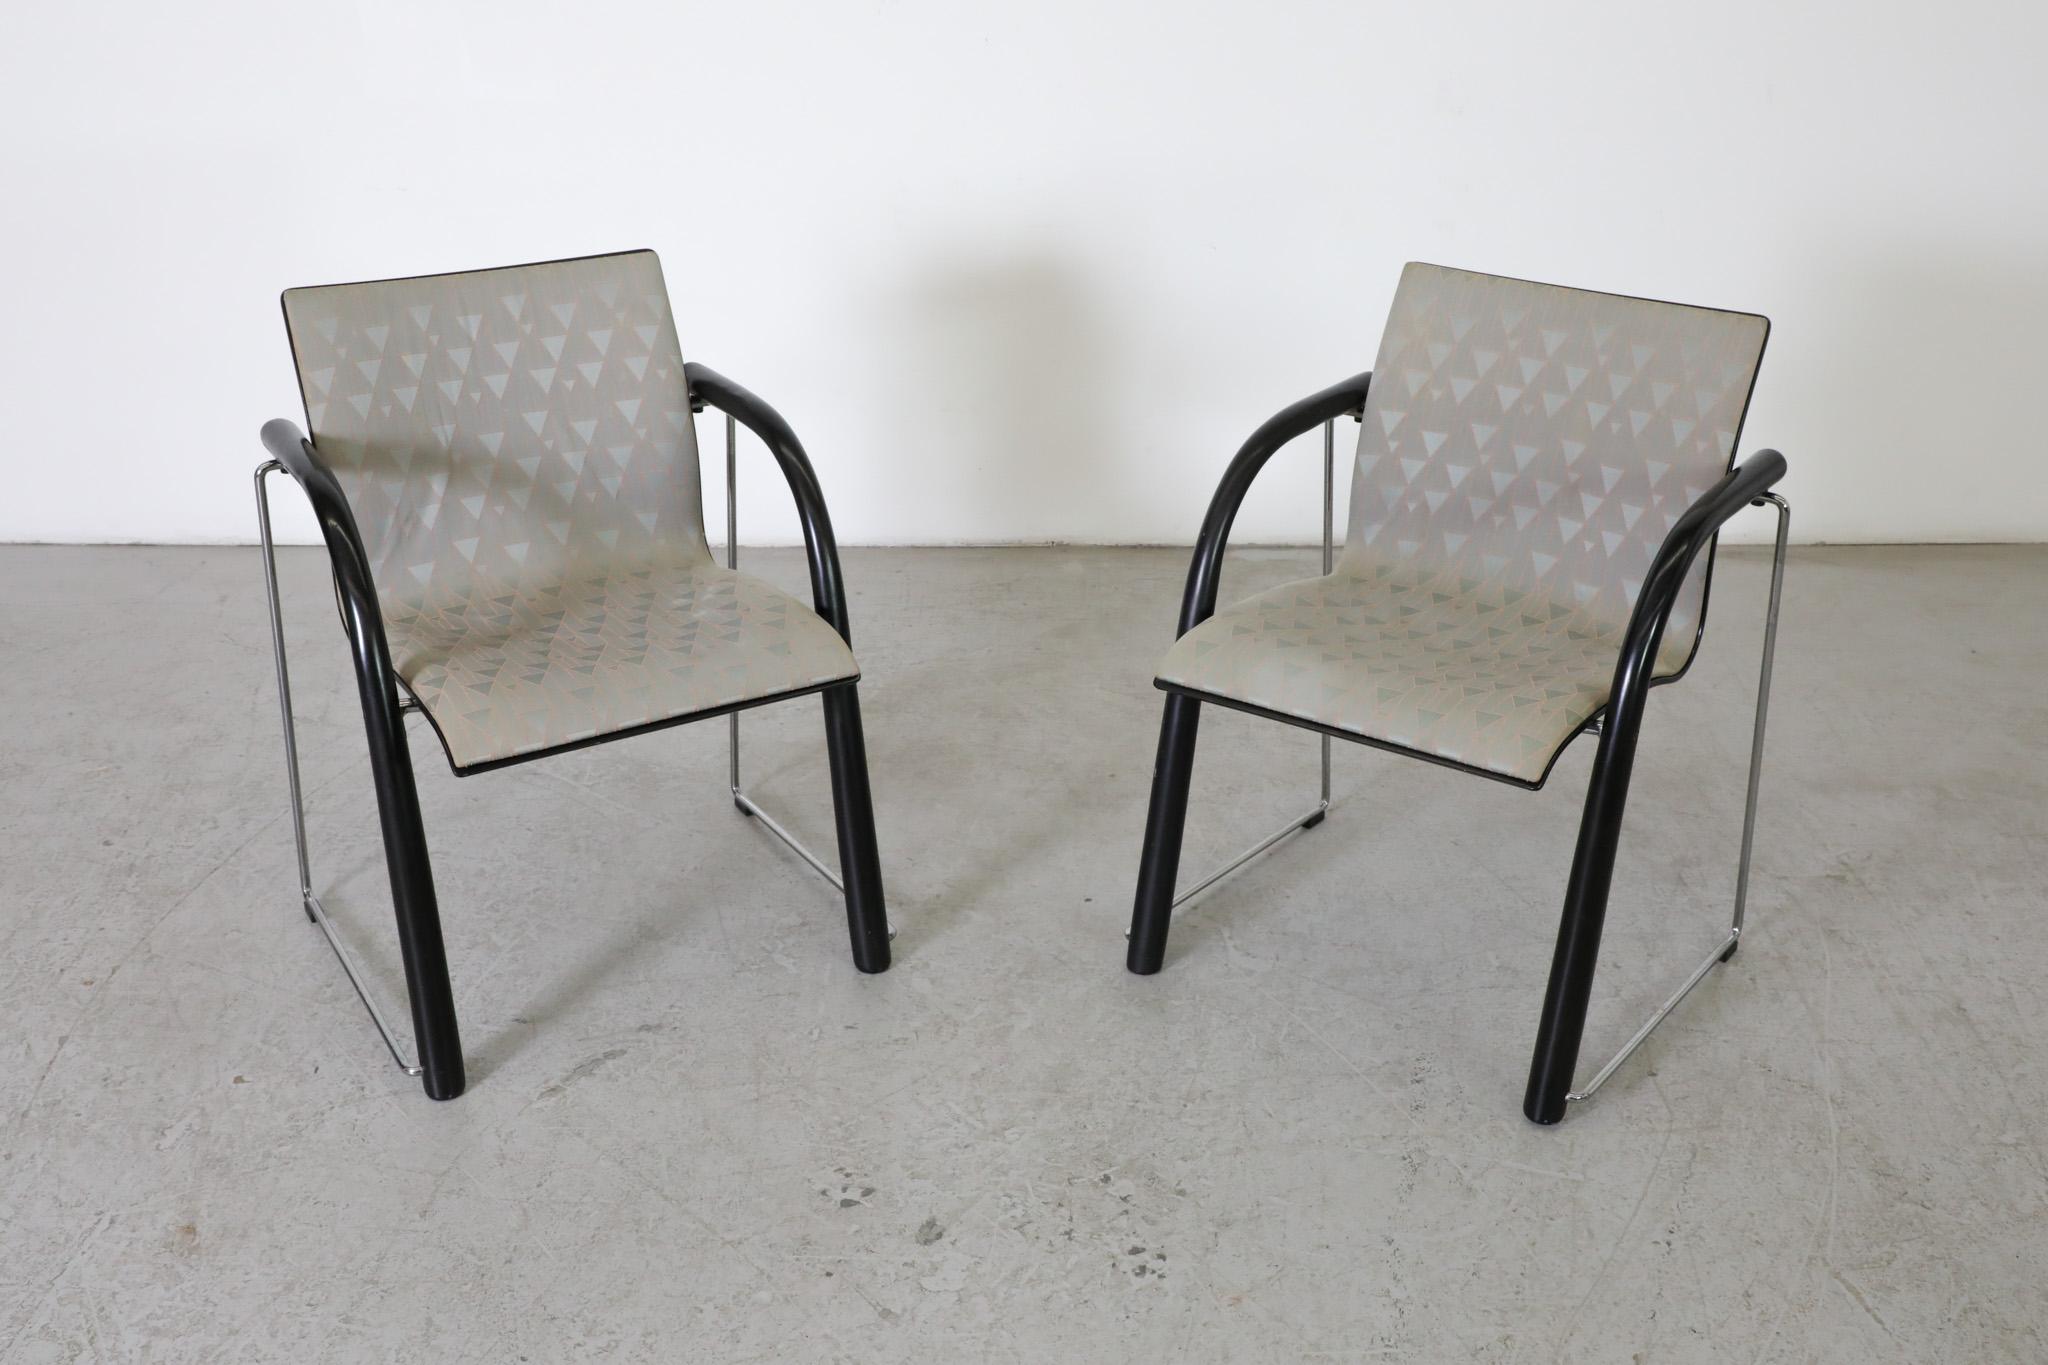 Late 20th Century Pair of Thonet S320 by Wulf Schneider & Ulrich Böhme Chairs w/ Black Curved Arms For Sale